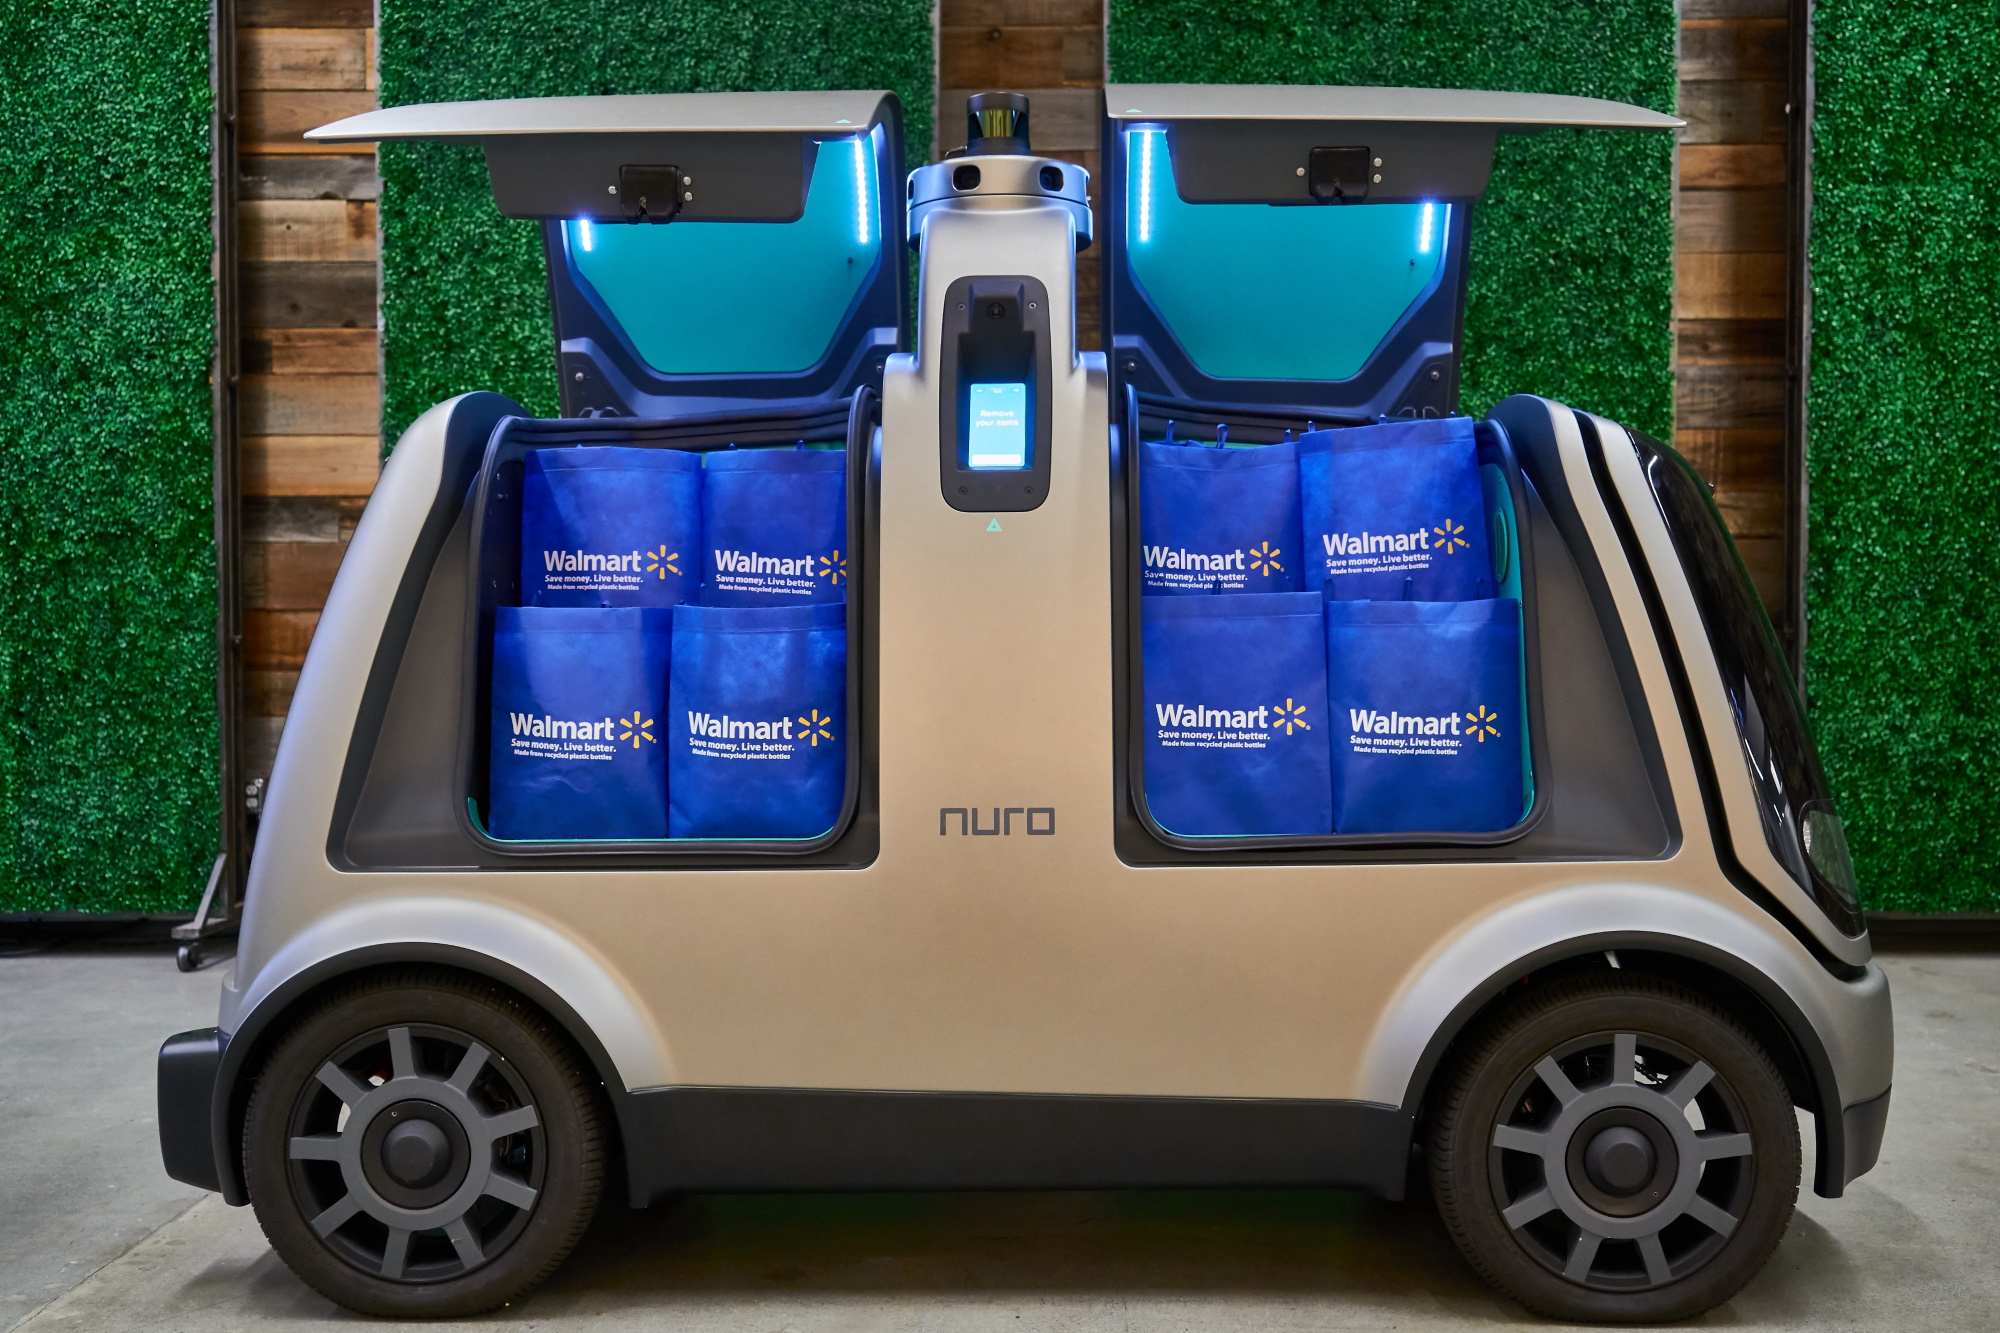 Why Nuro and Walmart Have Teamed Up: Bringing Autonomous Grocery Delivery Into 2020